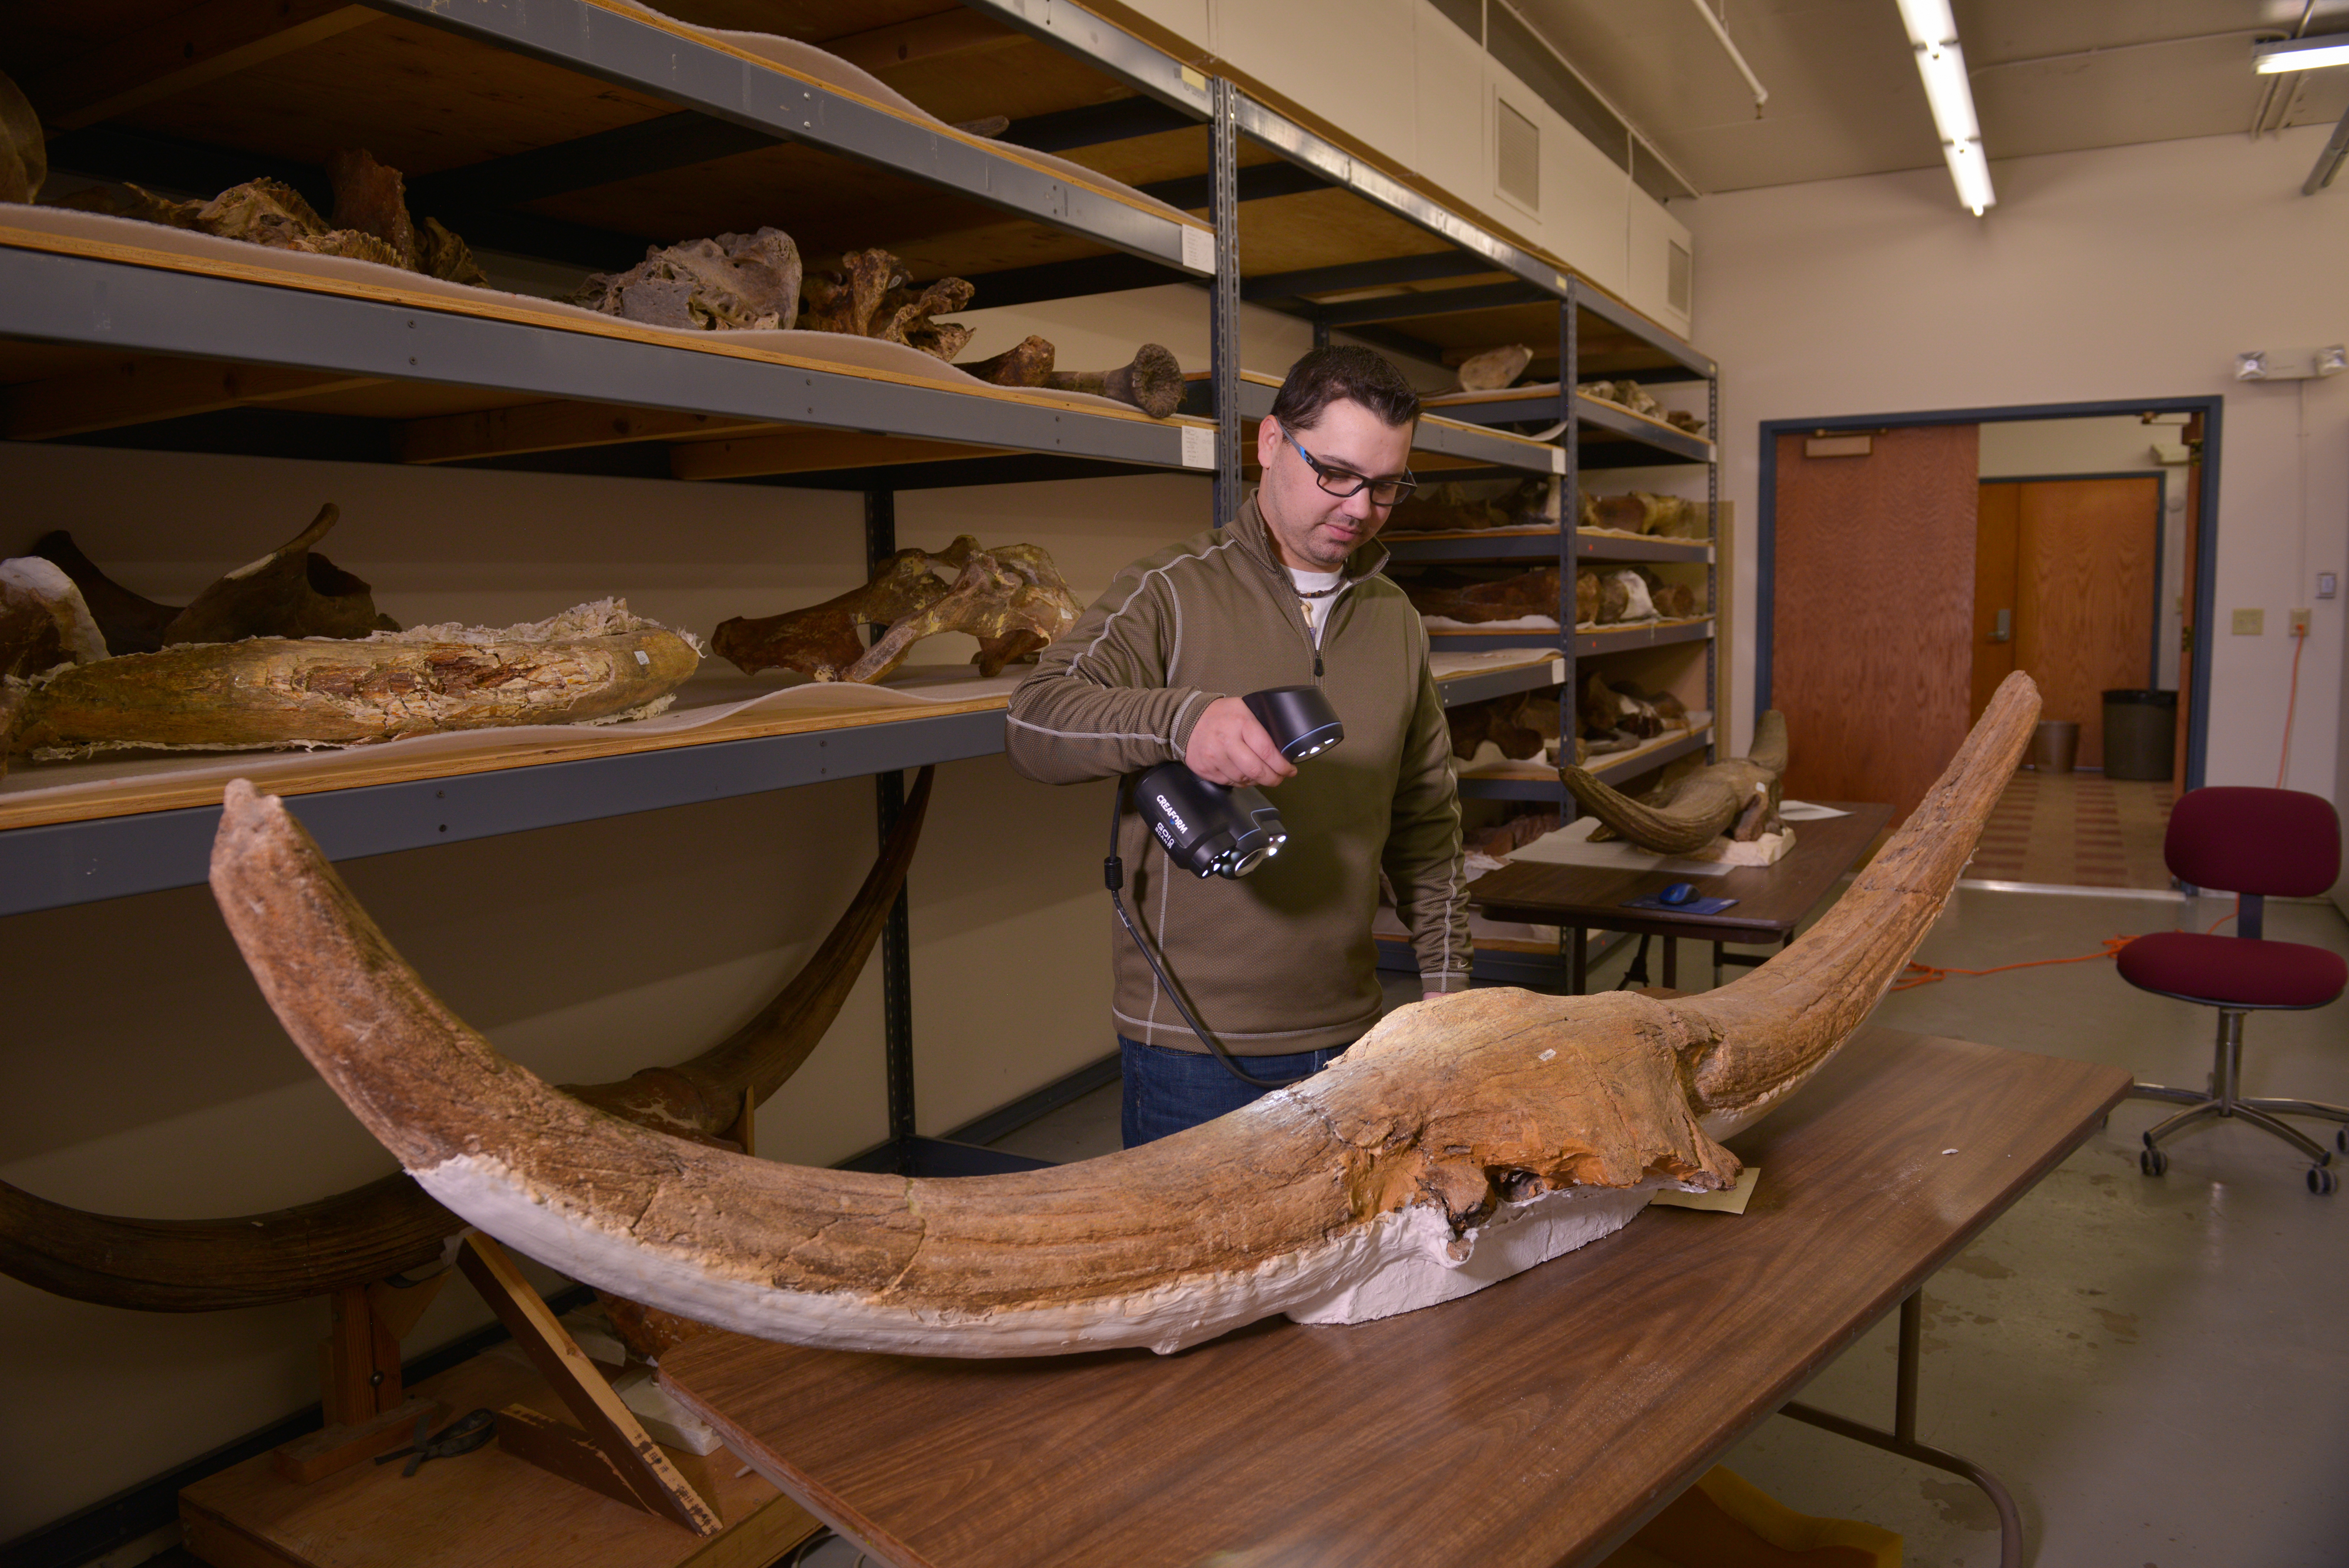 Reclamation's Bison latifrons collection is being 3-D scanned by the Idaho Virtualization Laboratory within the Idaho Museum of Natural History in Pocatello, ID.